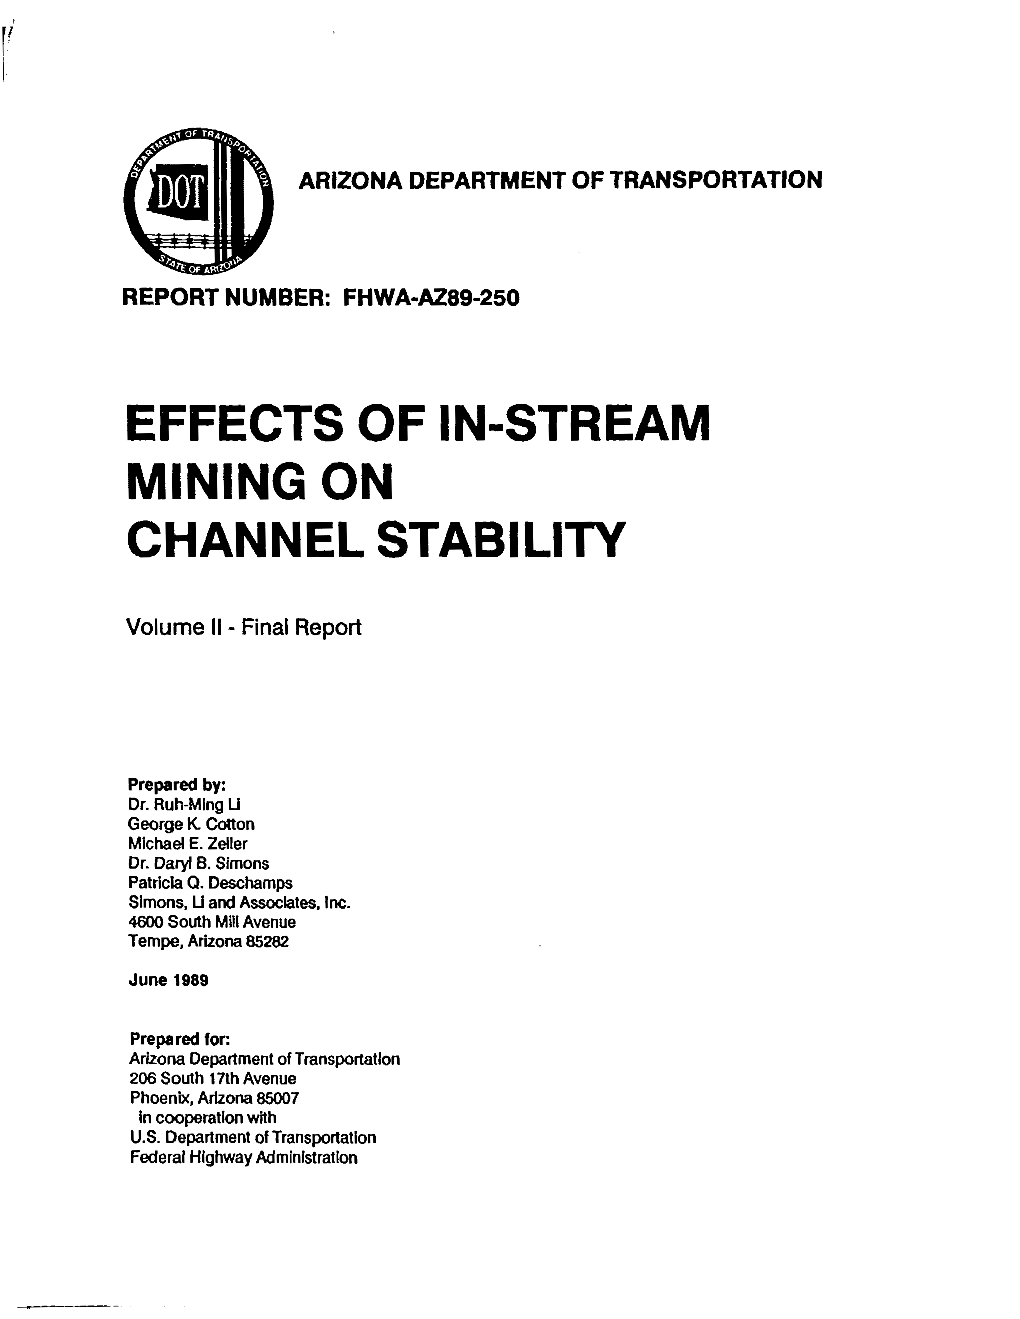 Effects of In-Stream Mining on Channel Stability